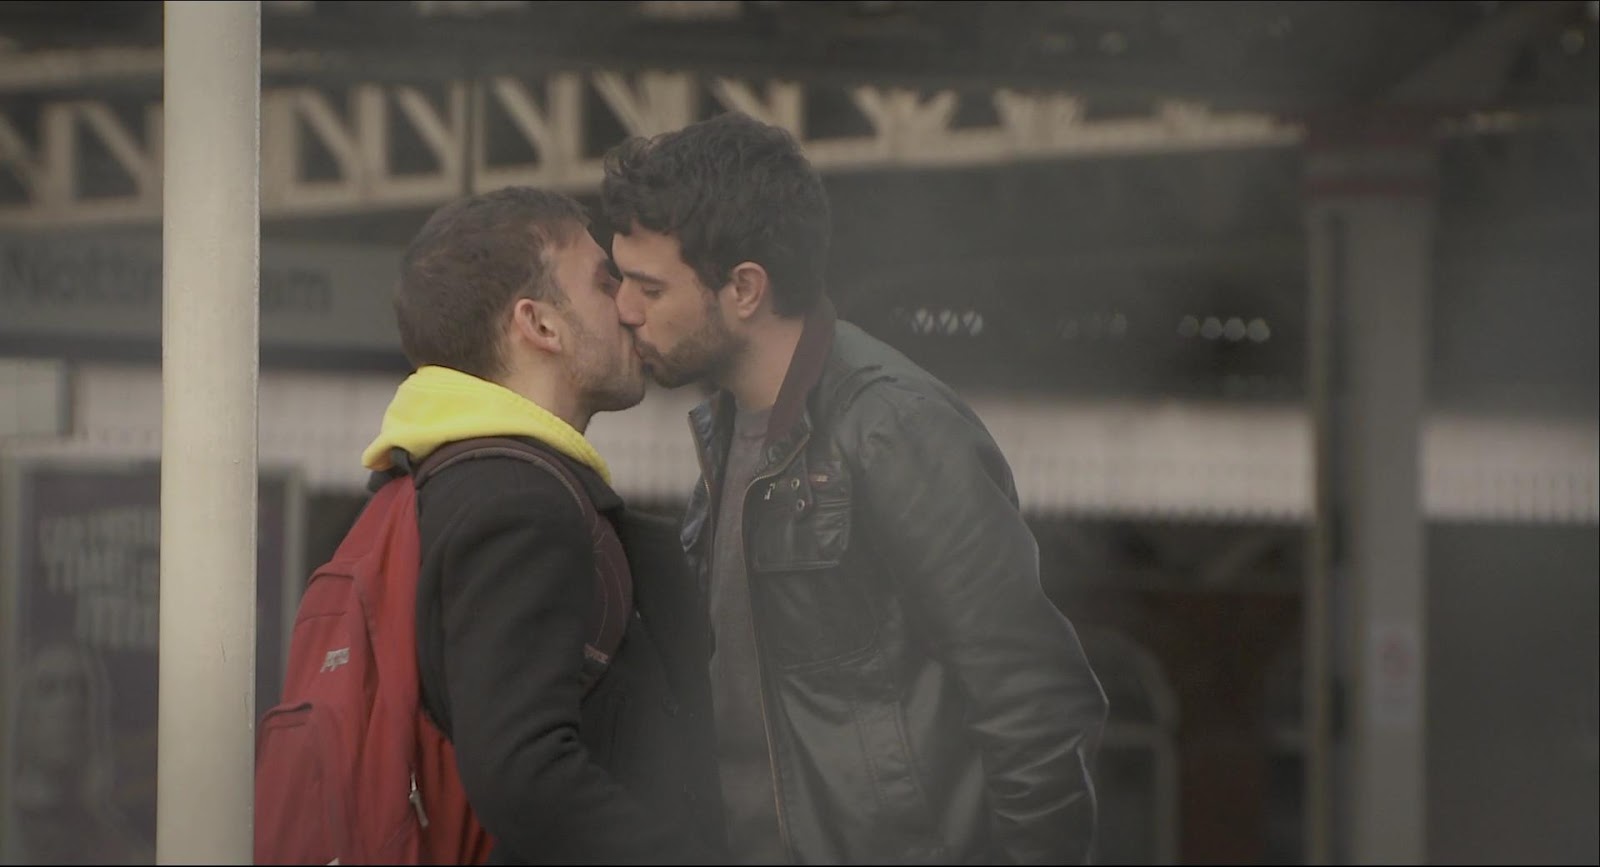 You have read this article Chris New /gay kissing /gay sex scene /rear nudi...